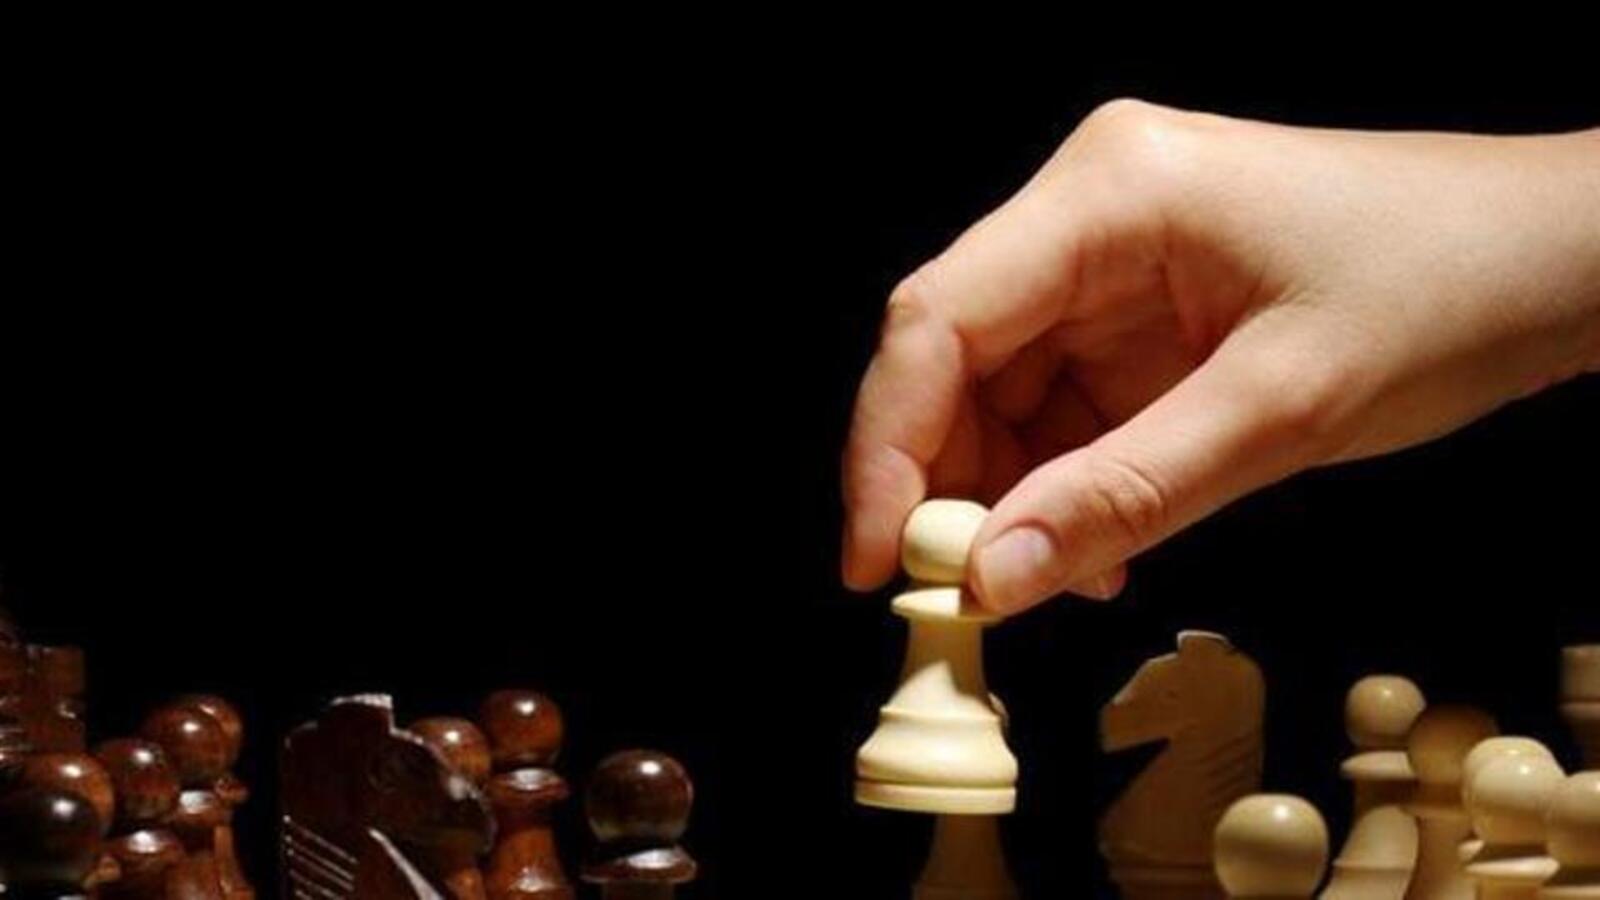 India to host 44th World Chess Olympiad 2022 in Chennai